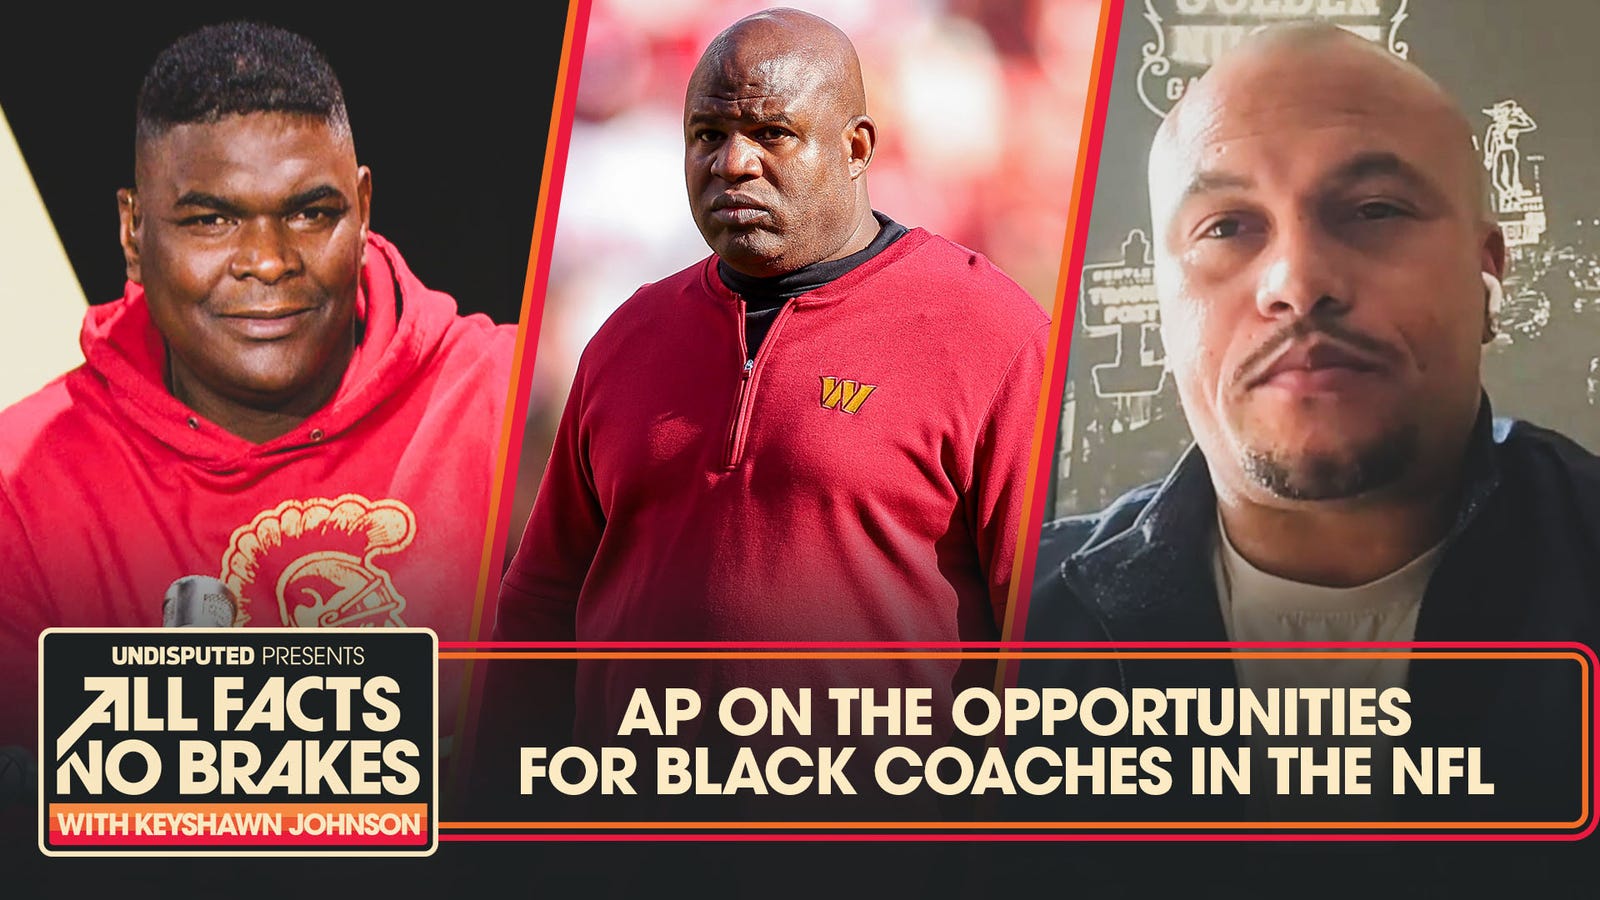 Antonio Pierce on the opportunities for Black coaches in the NFL